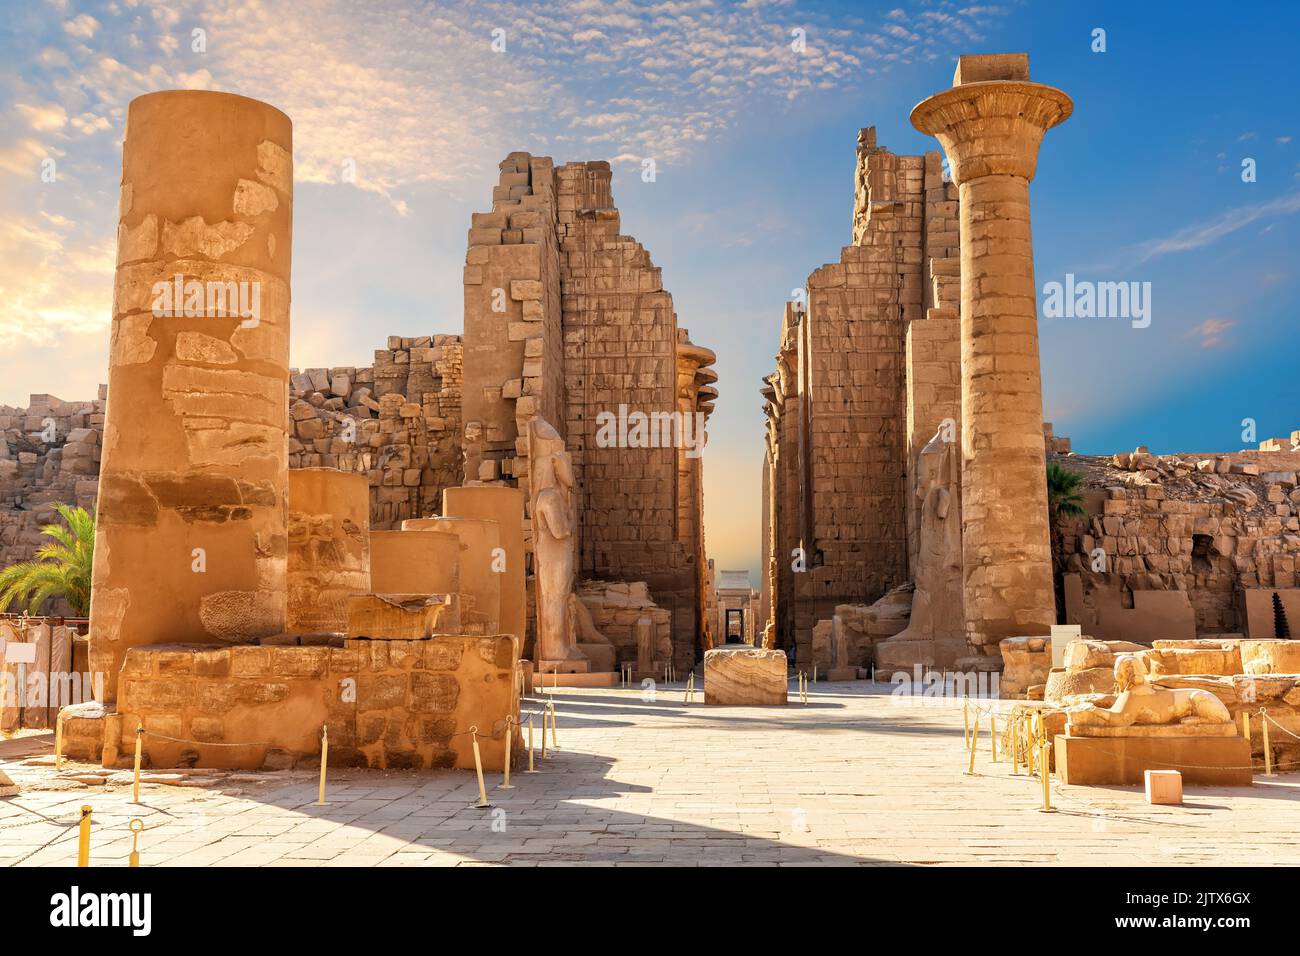 The Great Hypostyle Hall of the ancient Karnak Temple, Luxor, Egypt. Stock Photo